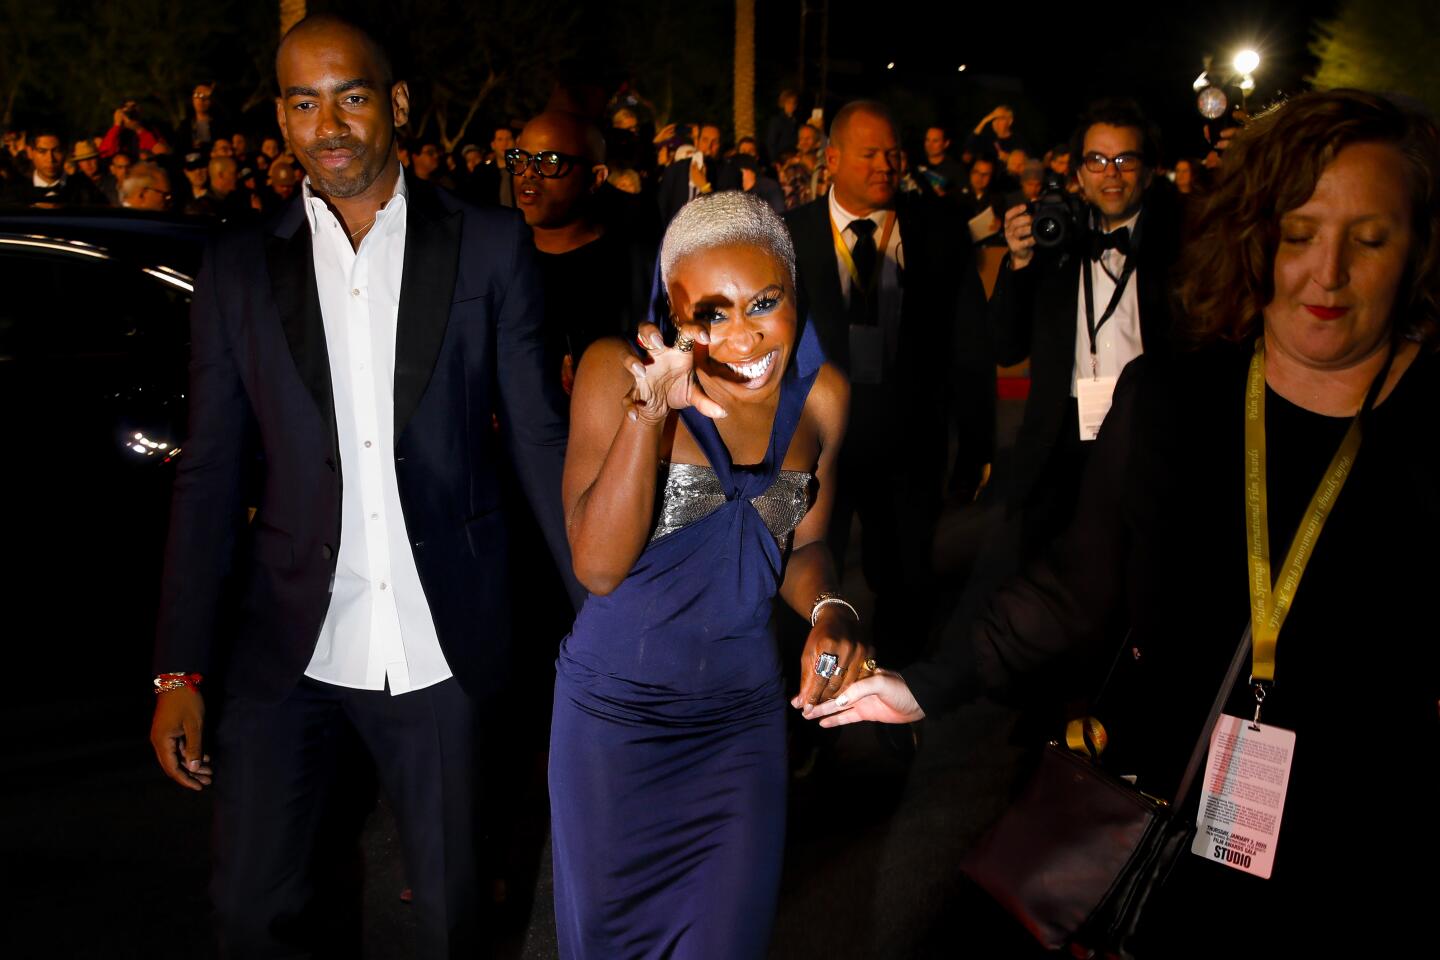 PALM SPRINGS, CA --JANUARY 02, 2020—Actress Cynthia Erivo gives autographs and takes pictures with fans upon arrival at the Palm Springs International Film Festival Film Awards Gala, at the Palm Springs Convention Center, in Palm Springs, CA, Jan 02, 2020. (Jay L. Clendenin / Los Angeles Times)